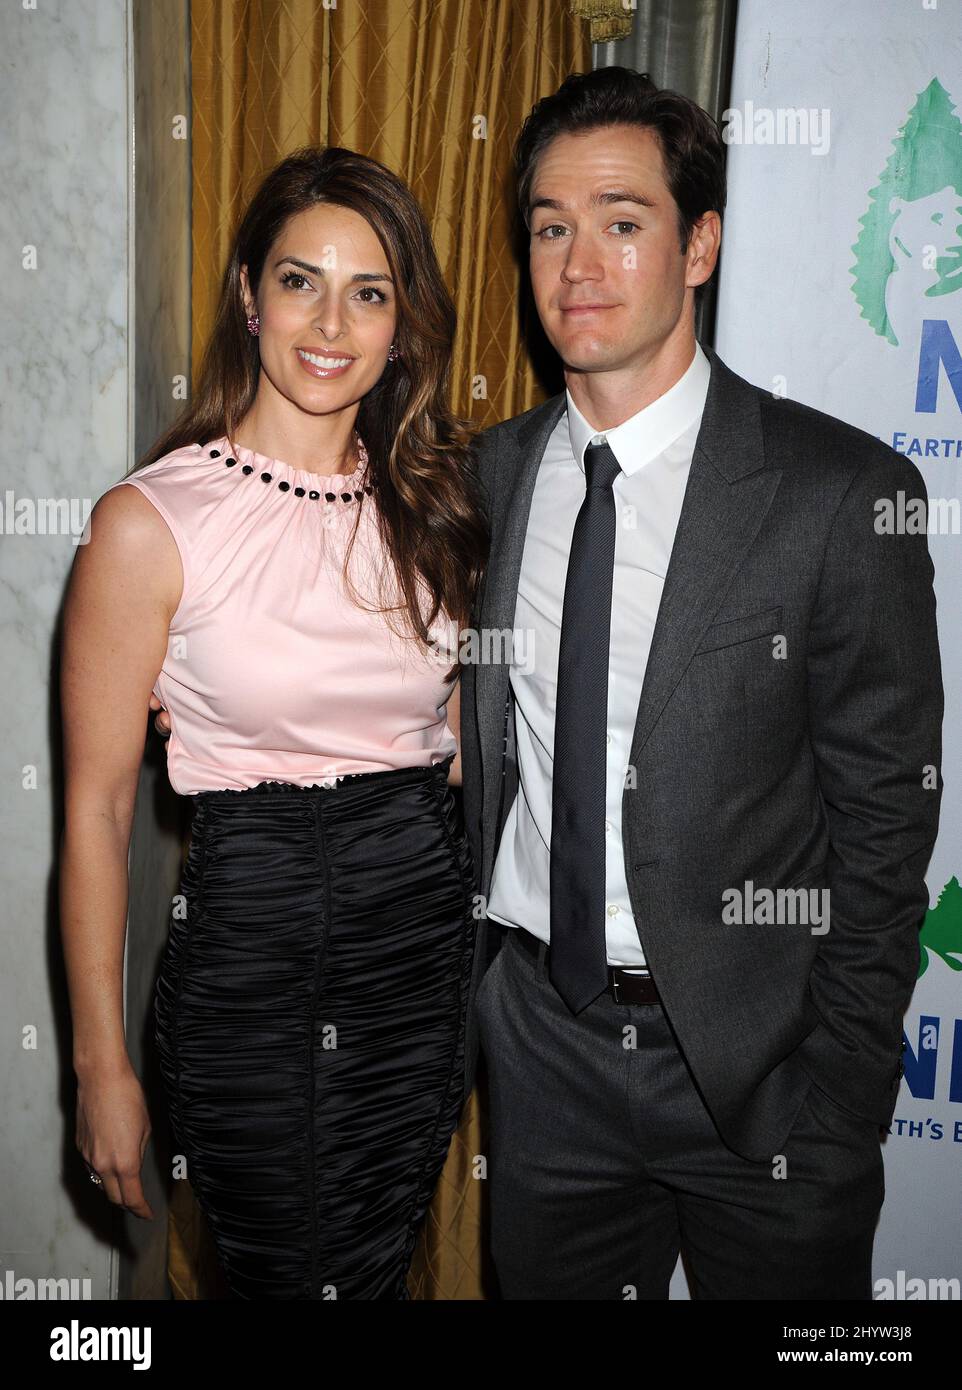 Mark Paul Gosselaar And Lisa Ann Russell Attends Nrdcs 20th Anniversary At The Wilshire Hotel In Beverly Hills Ca Usa 2HYW3J8 